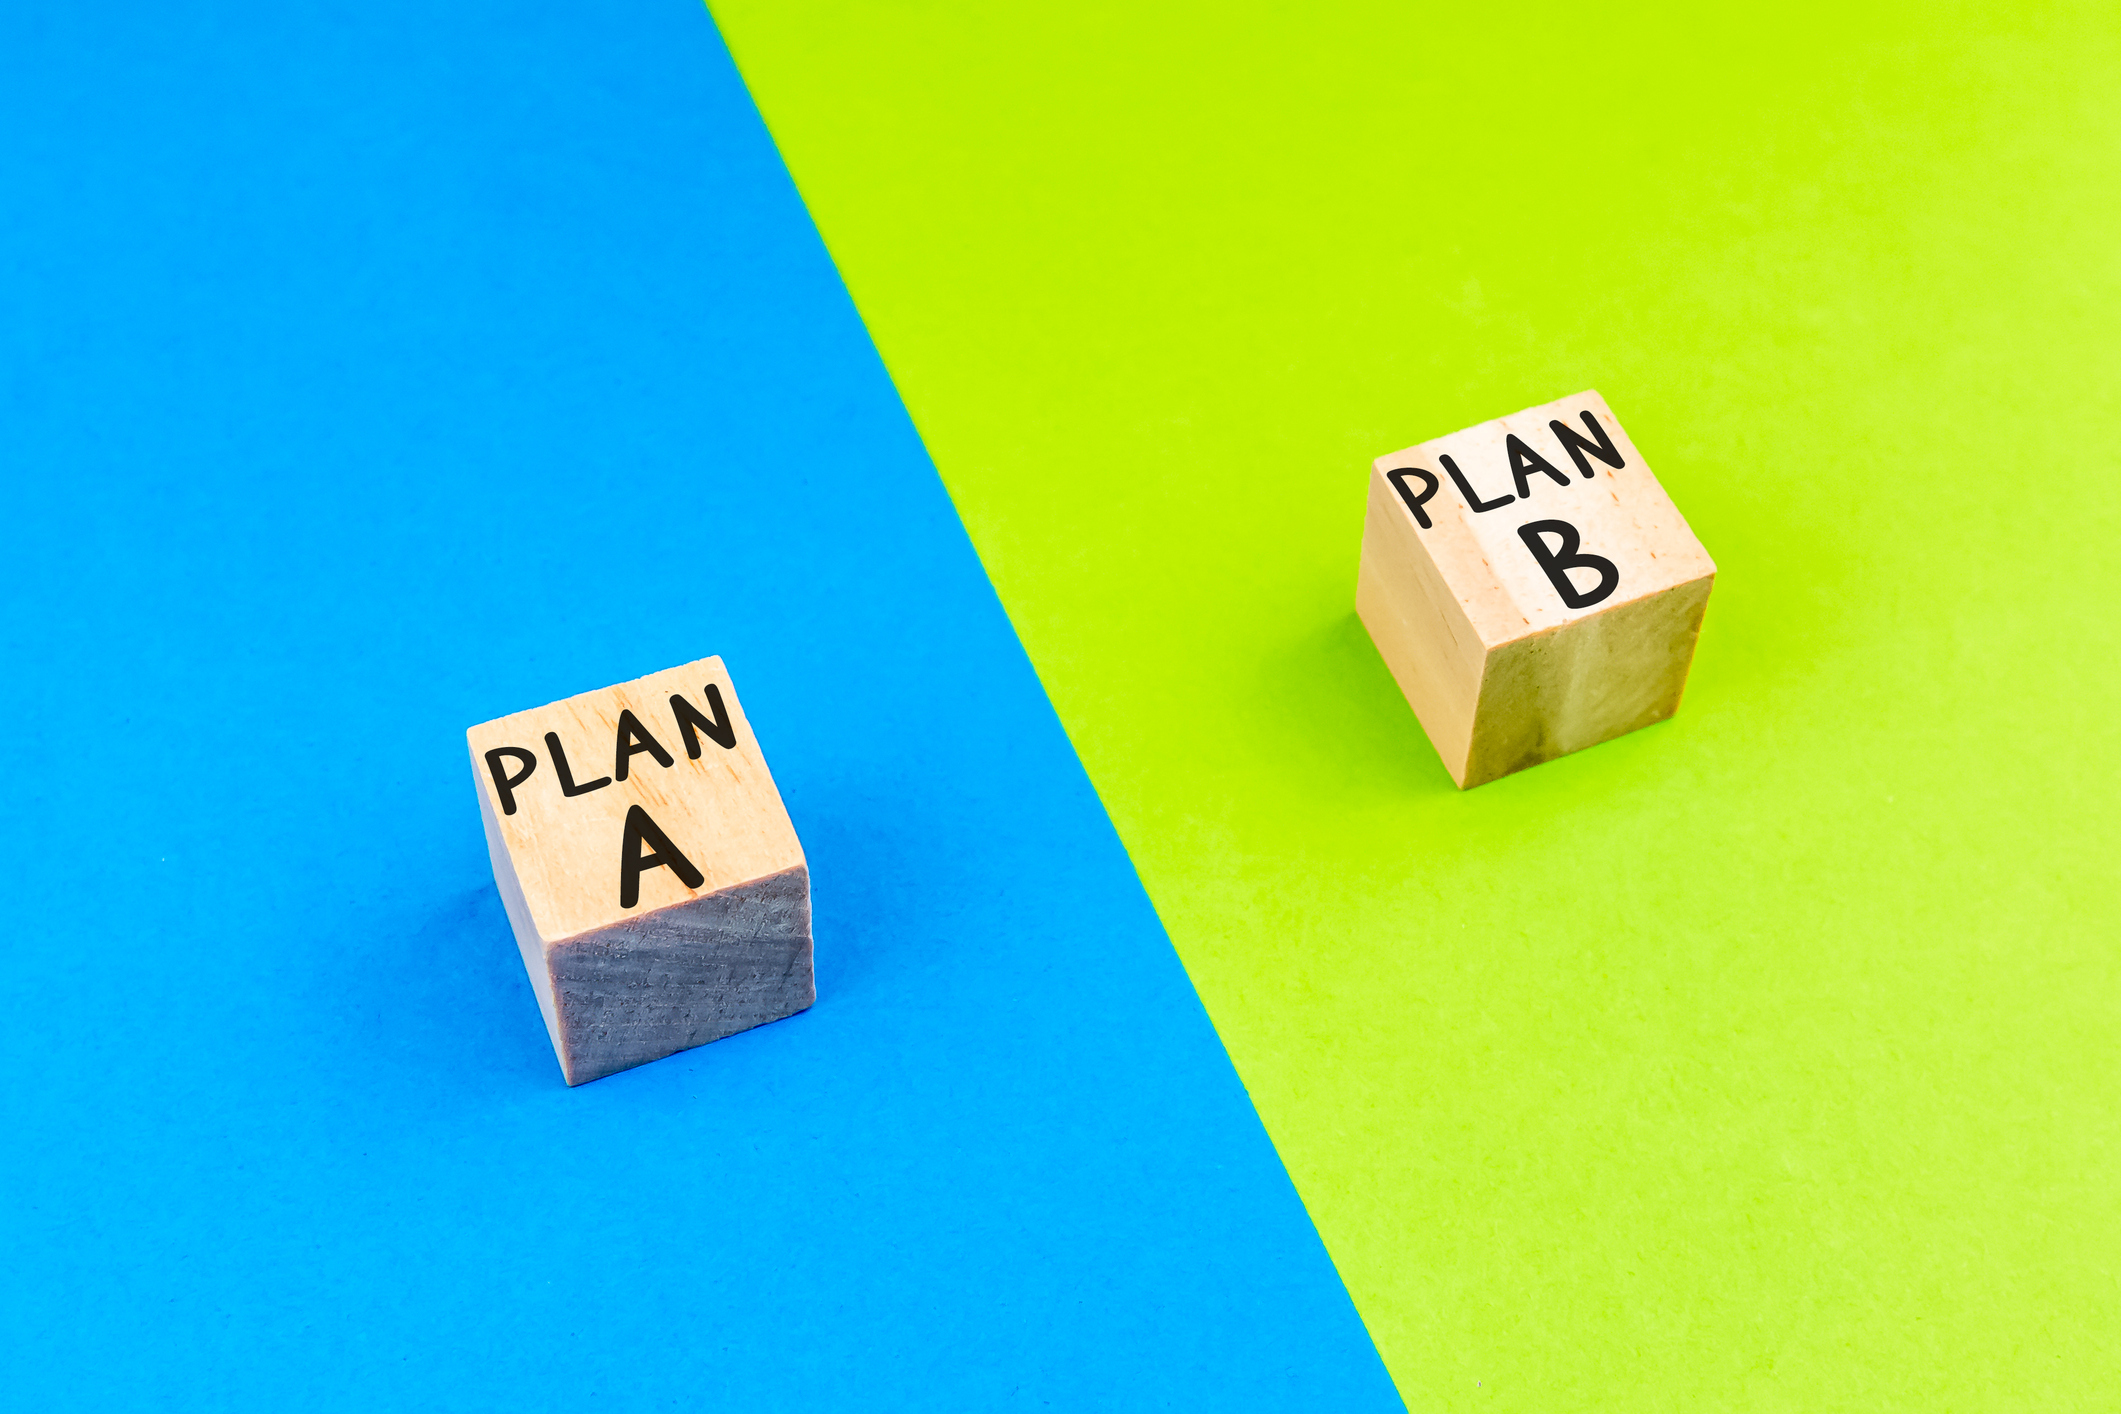 wooden block with word PLAN A and PLAN B. in front of a color-divided background